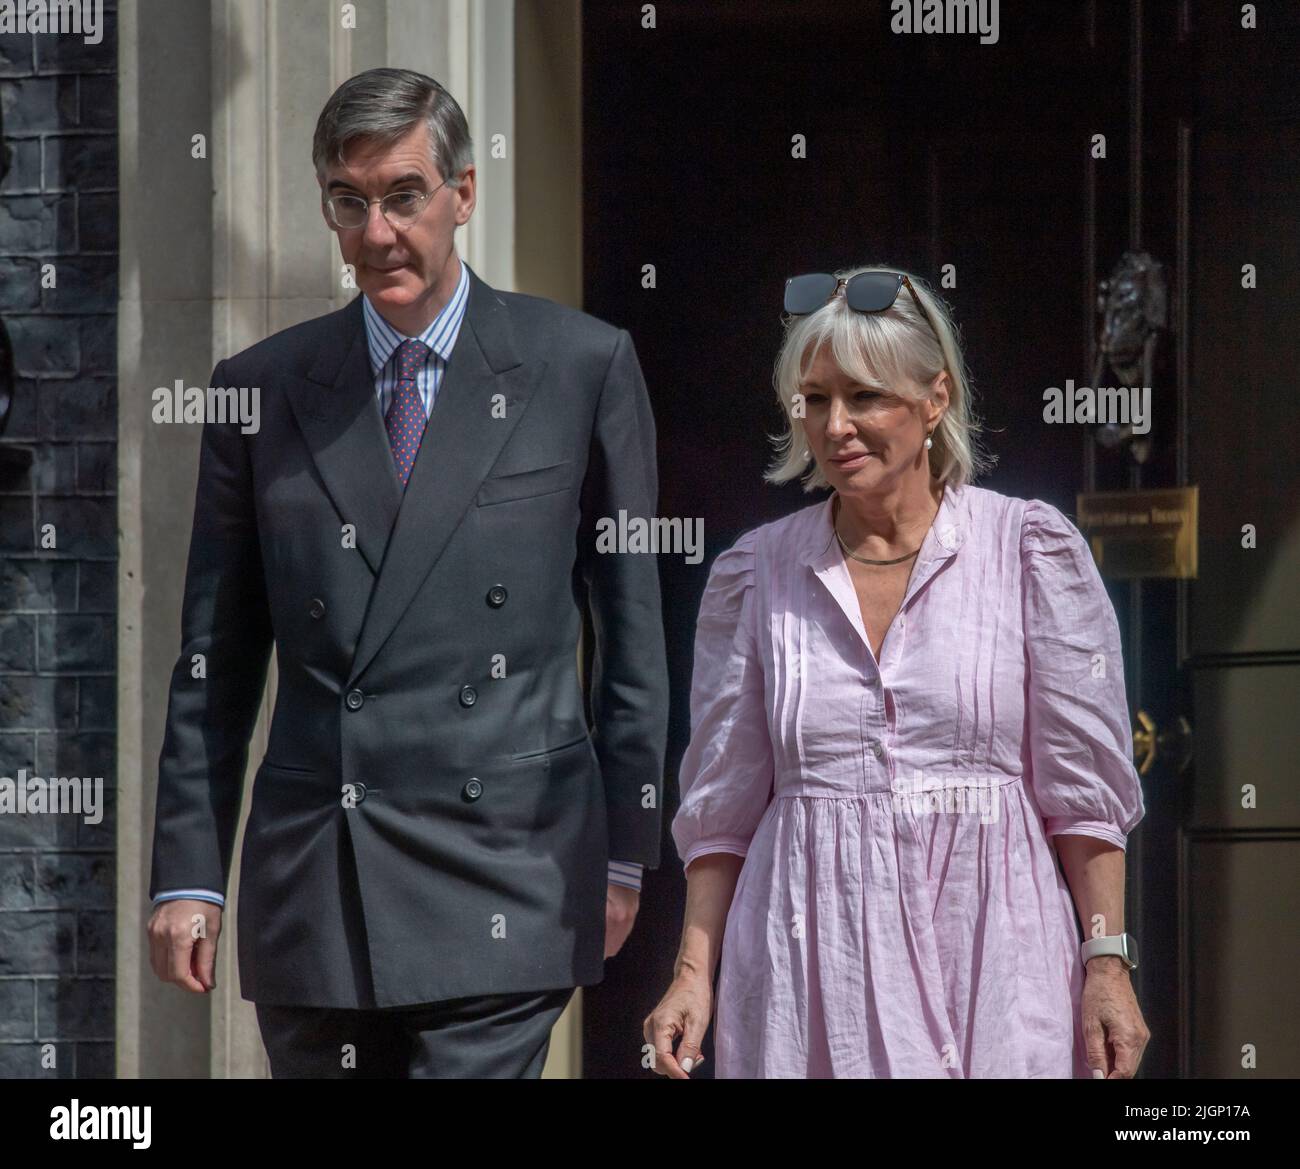 Downing Street, London, UK. 12 July 2022. Jacob Rees-Mogg (Minister of State, Minister for Brexit Opportunities and Government Efficiency) and Nadine Dorries (Secretary of State for Digital, Culture, Media and Sport) issue a joint statement outside 10 Downing Street in support of Liz Truss for Leader of the Conservative party and Prime Minister. Credit: Malcolm Park/Alamy Live News Stock Photo